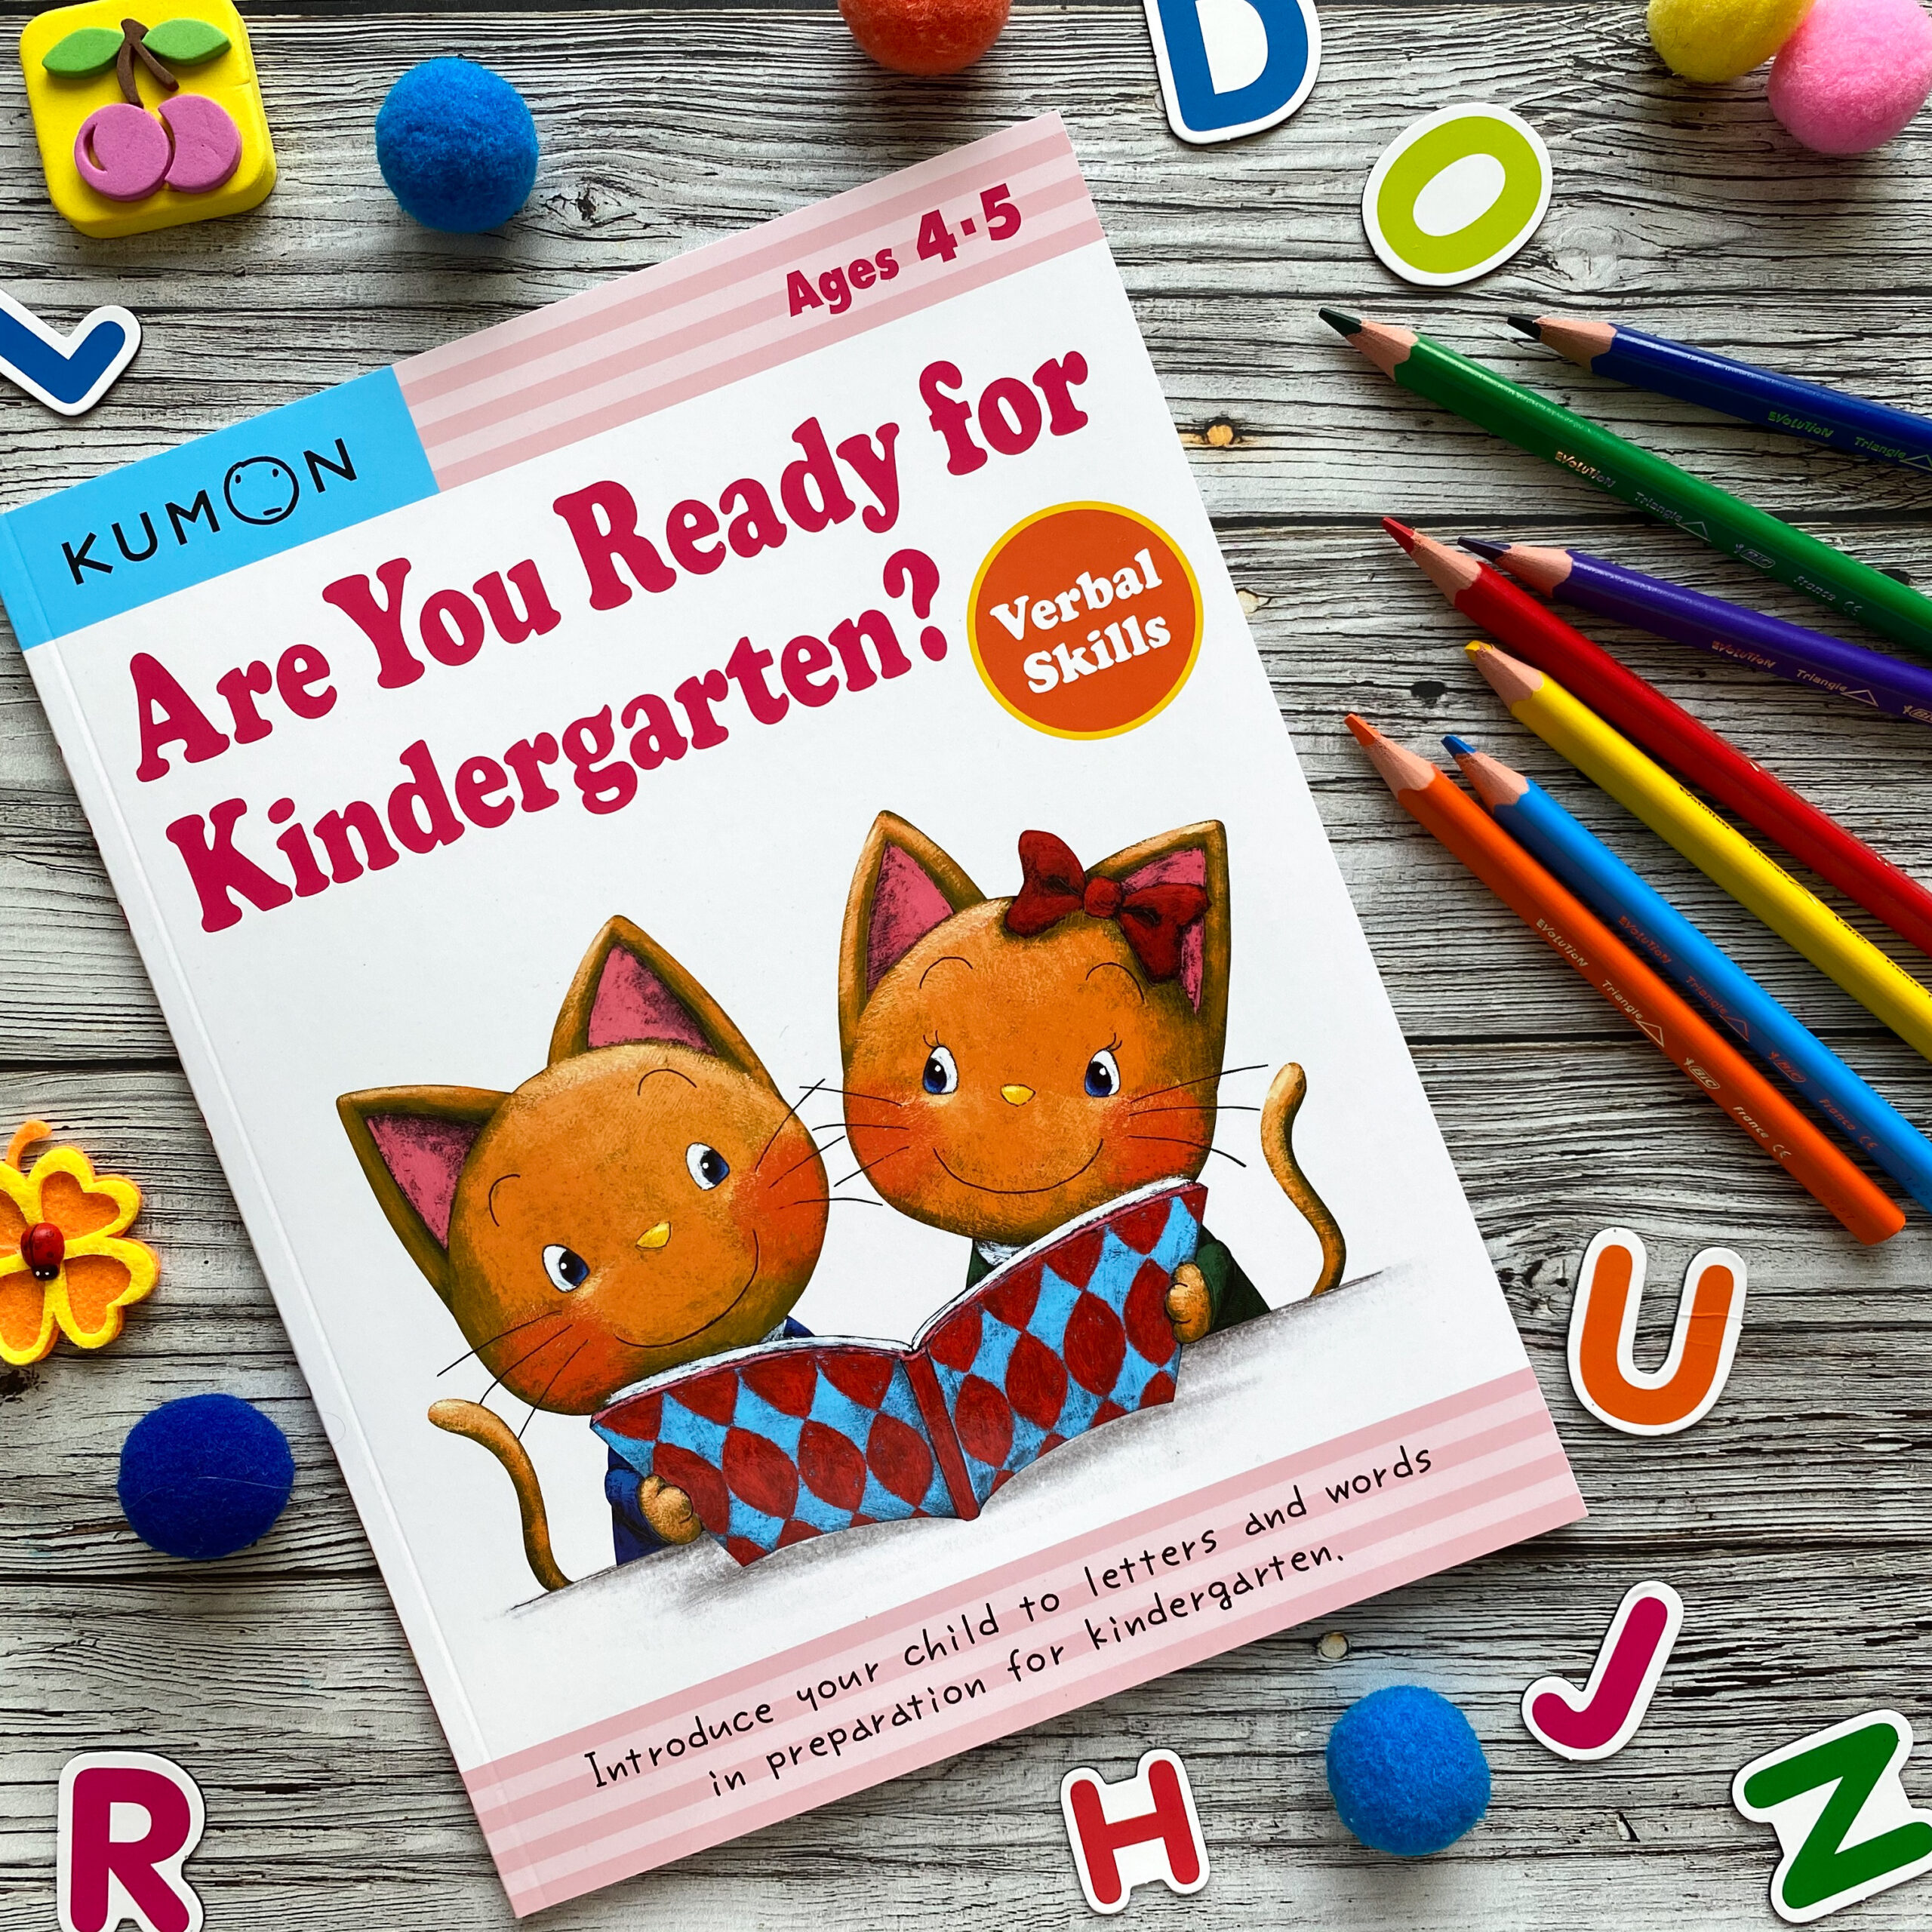 Are You Ready For Kindergarden? Verbal Skills, 4-5 1